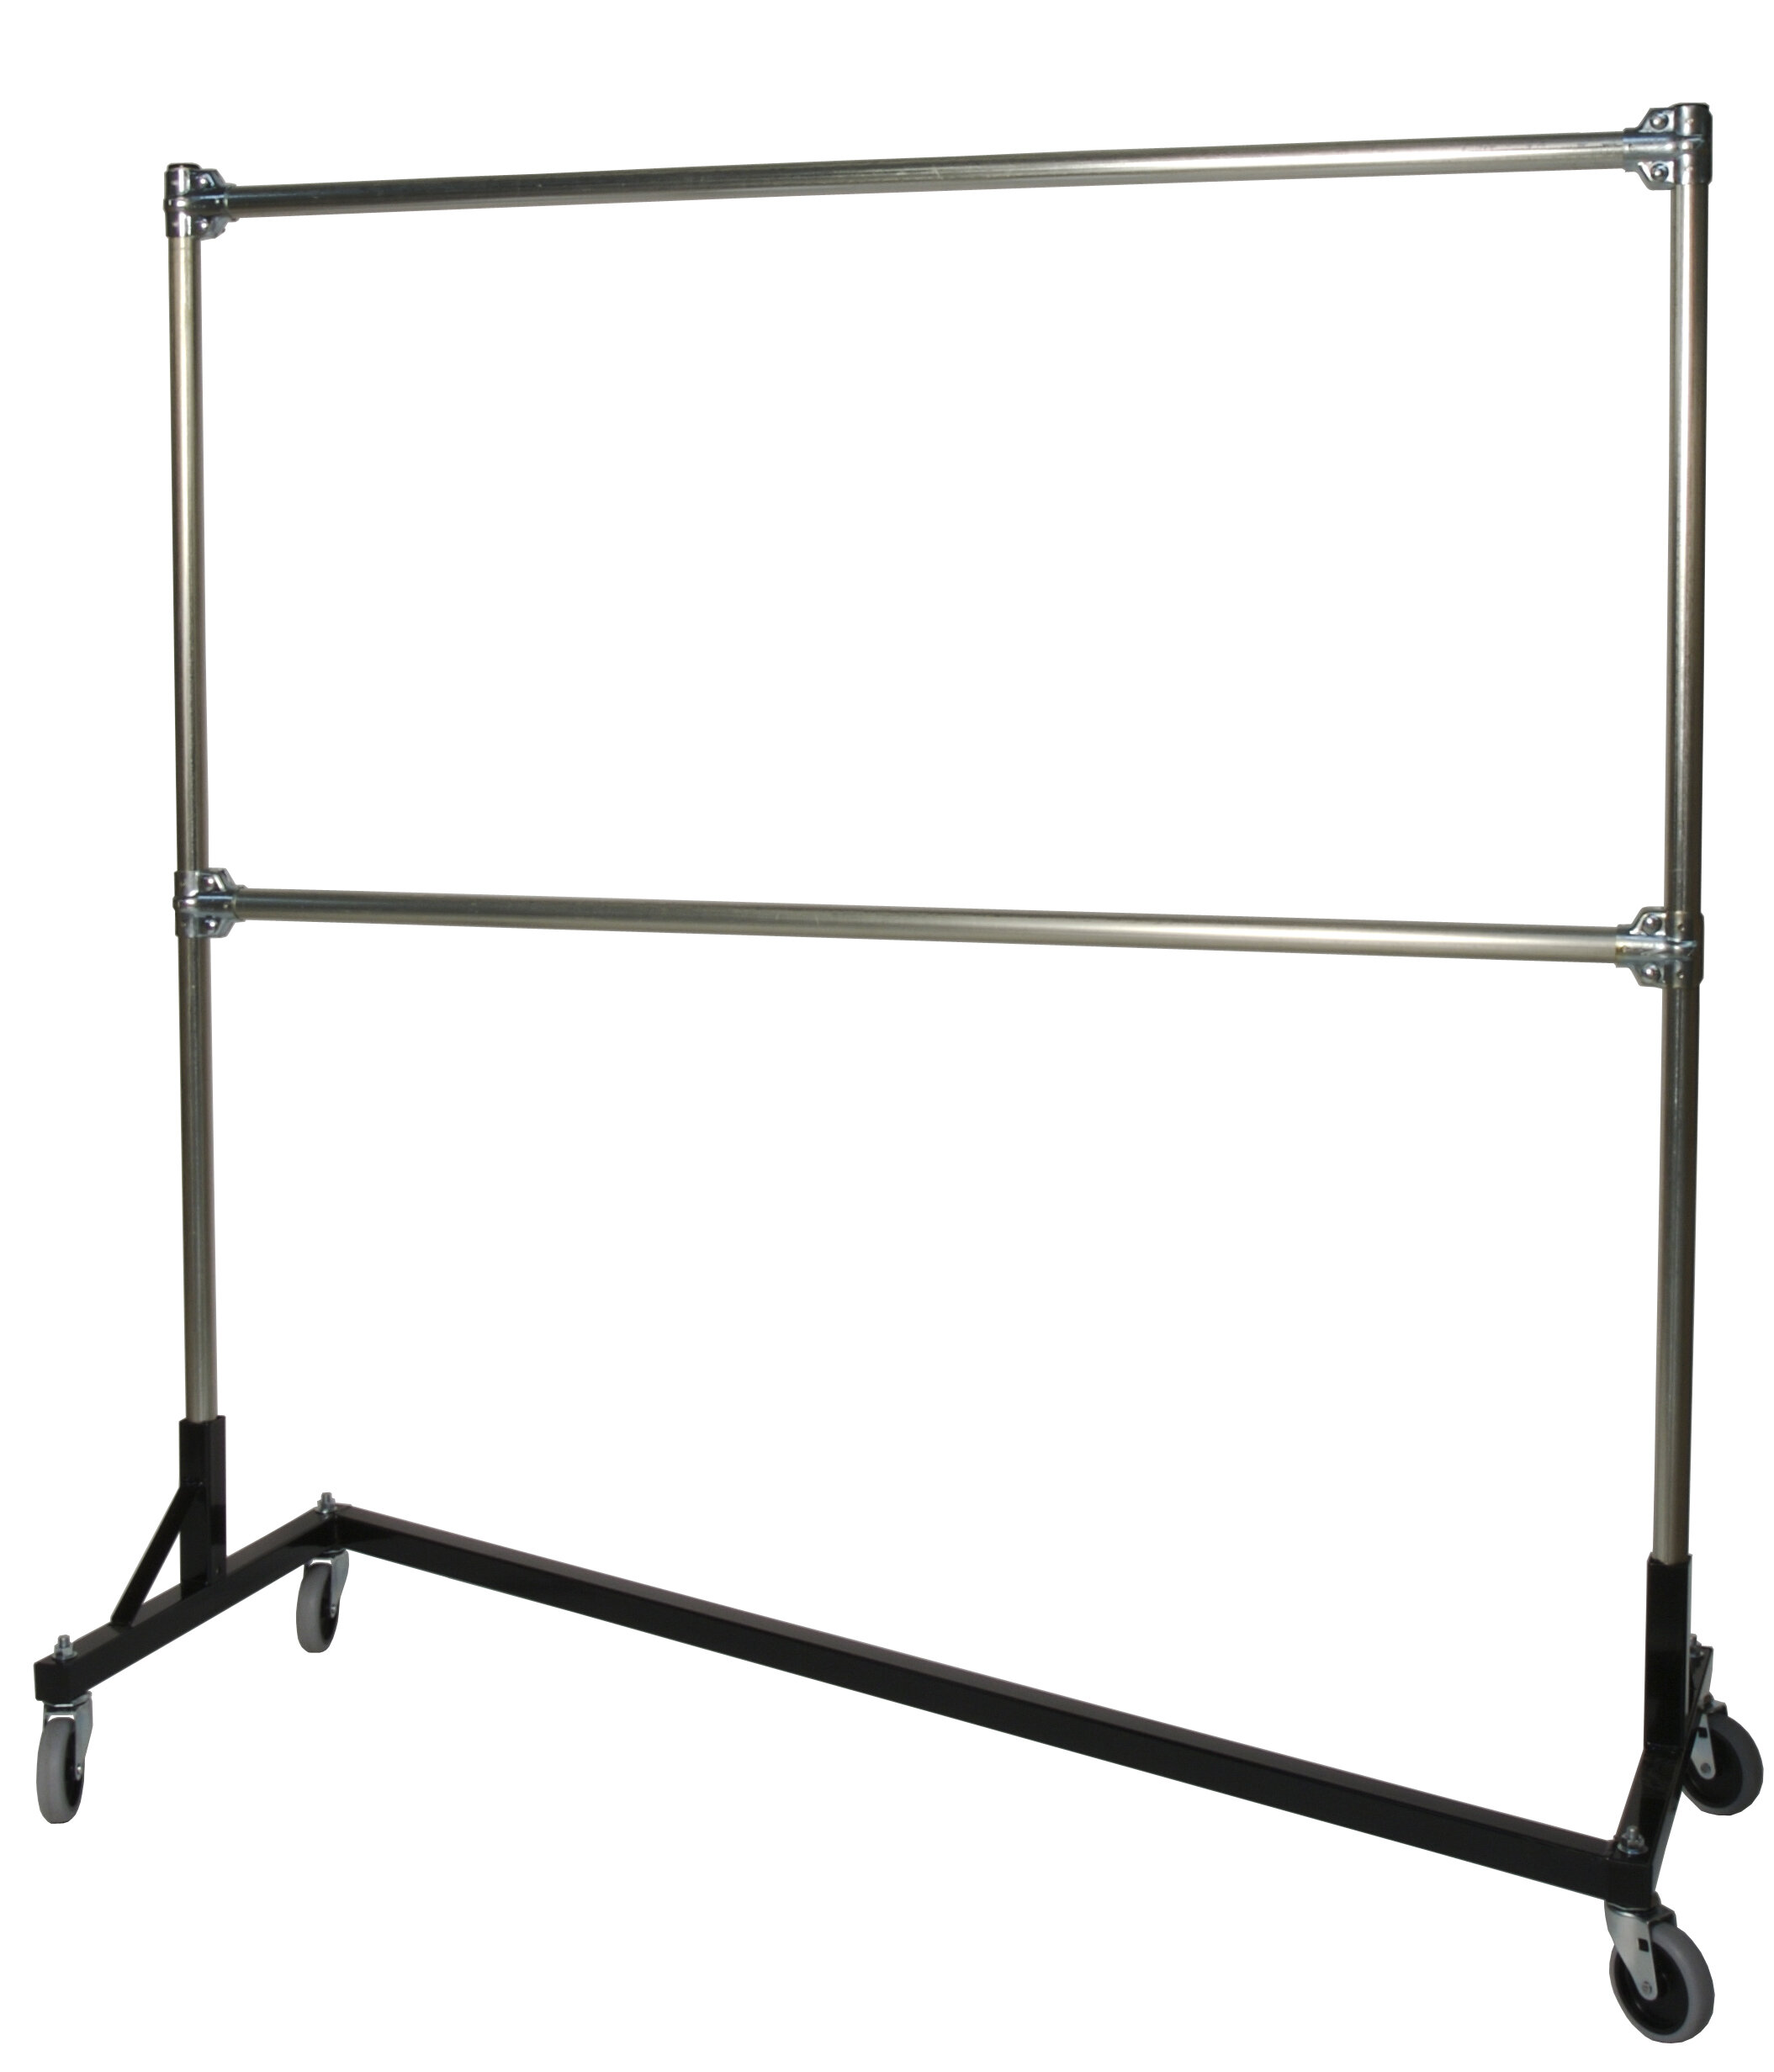 Details about   Removable Single Rail Garment Rack Laundry Drying Stand Clothes Holder VILR e 69